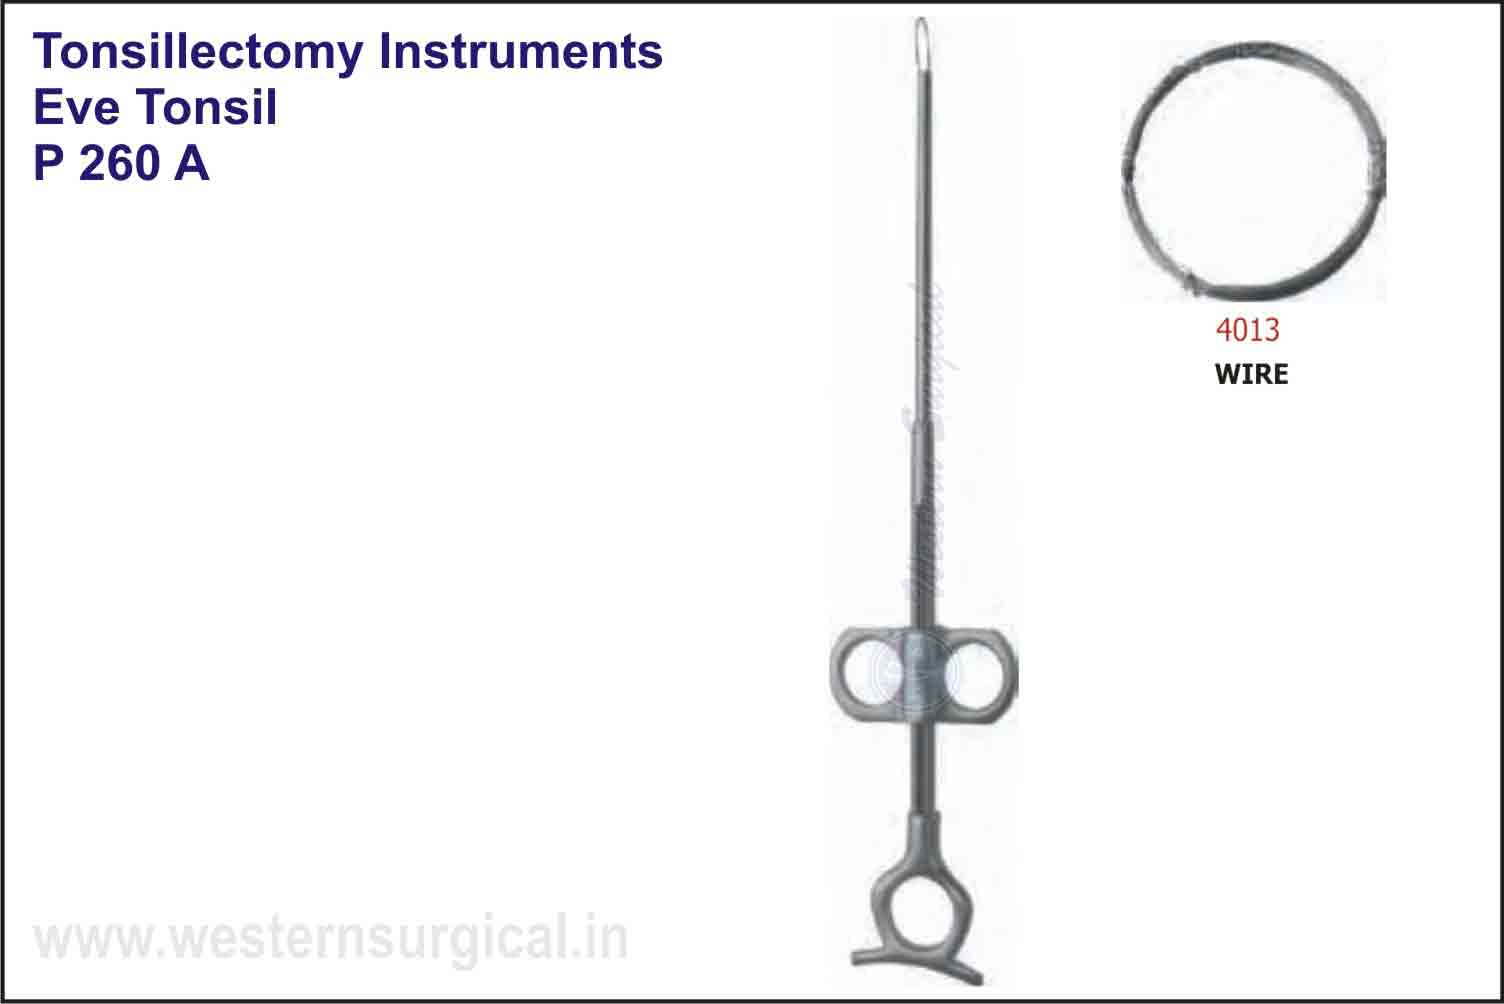 EVE TONSIL SNARE & WIRE